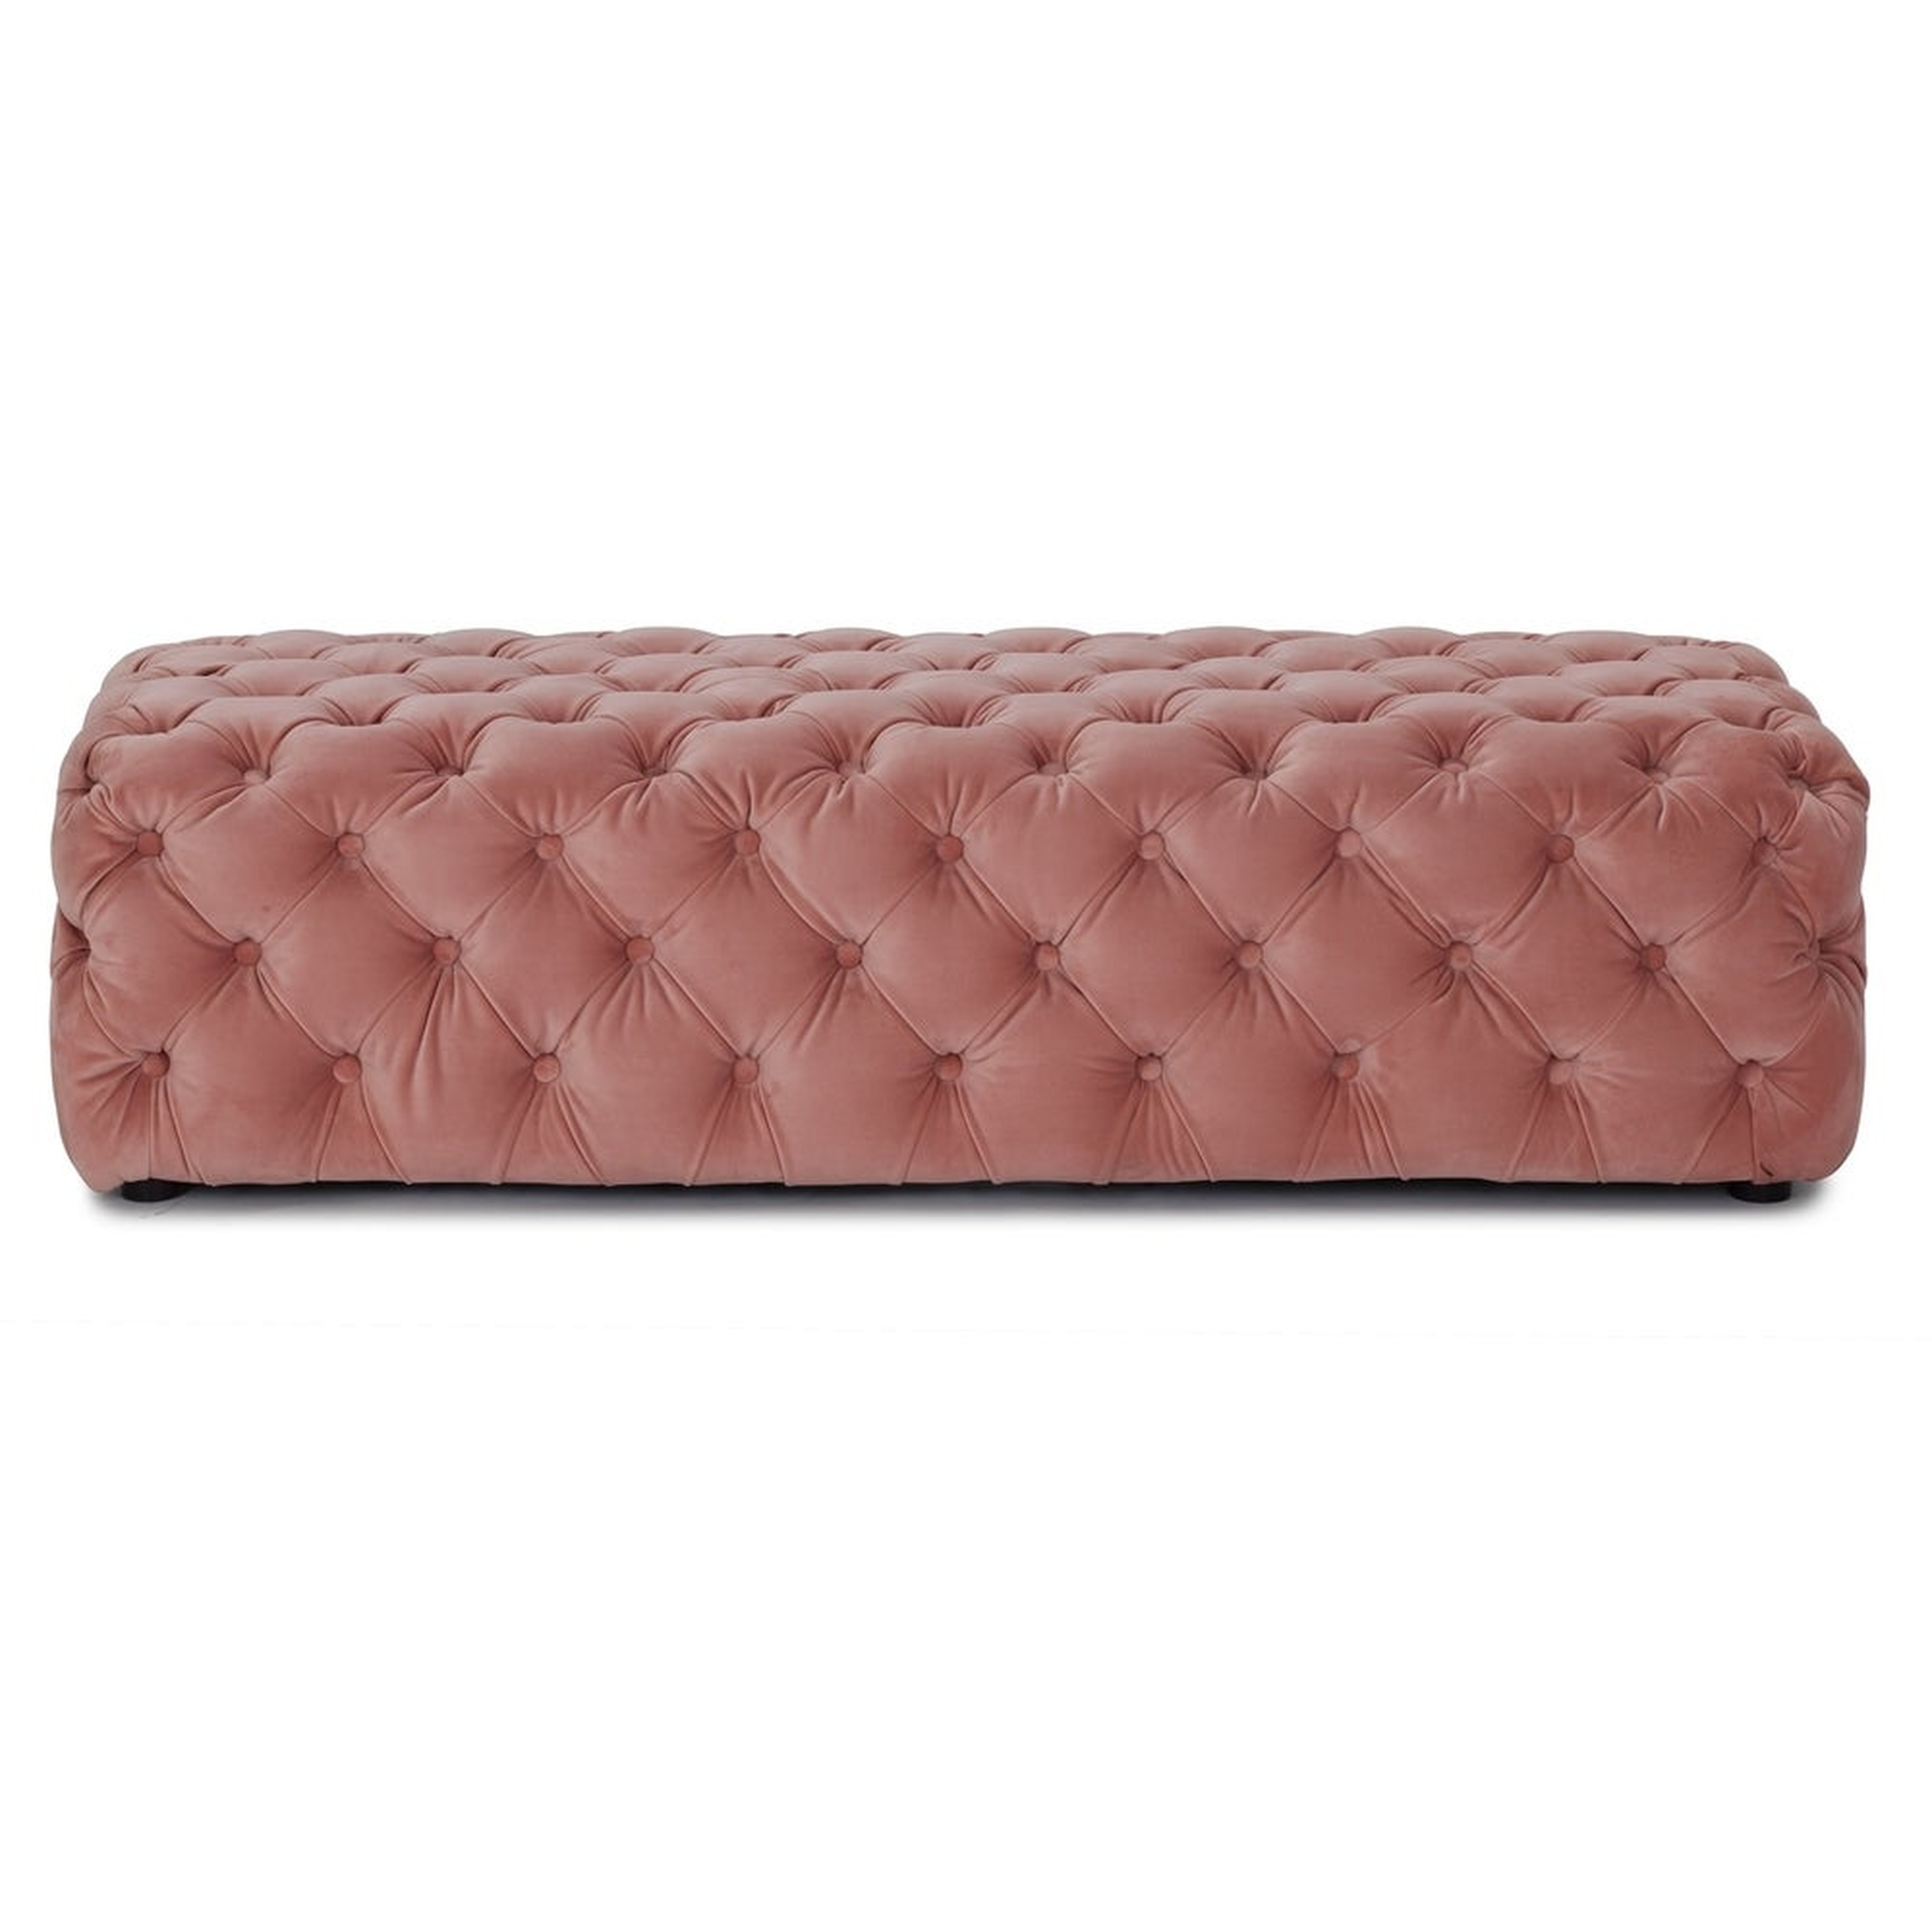 Silver Orchid Di Marzio Diamond Tufted Bench - Pink - Overstock